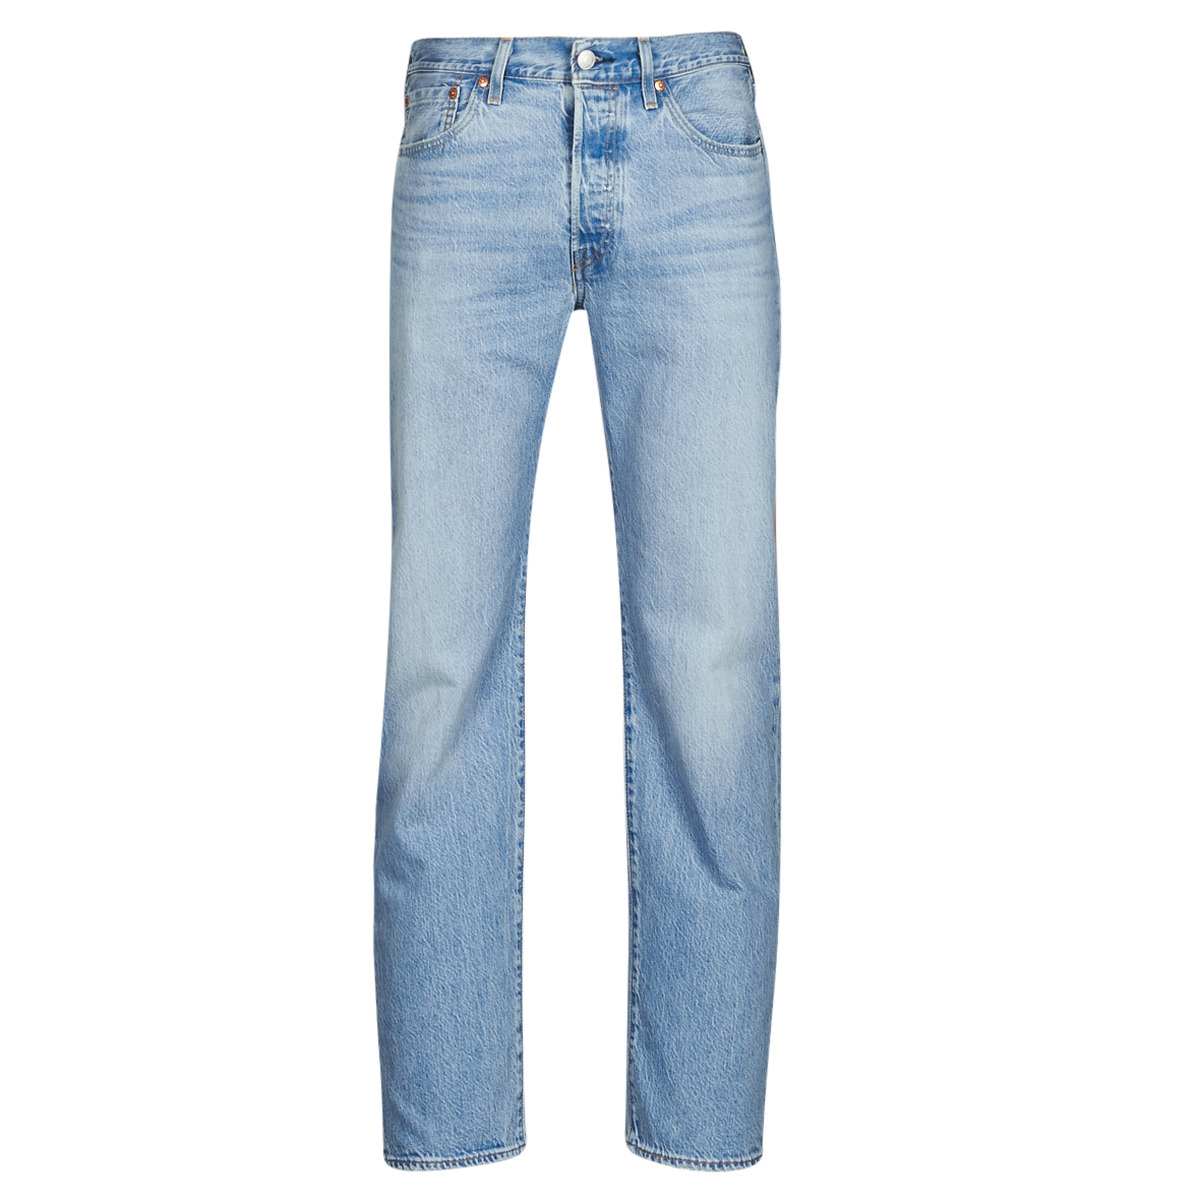 Spartoo Mens Blue Jeans by Levi's GOOFASH